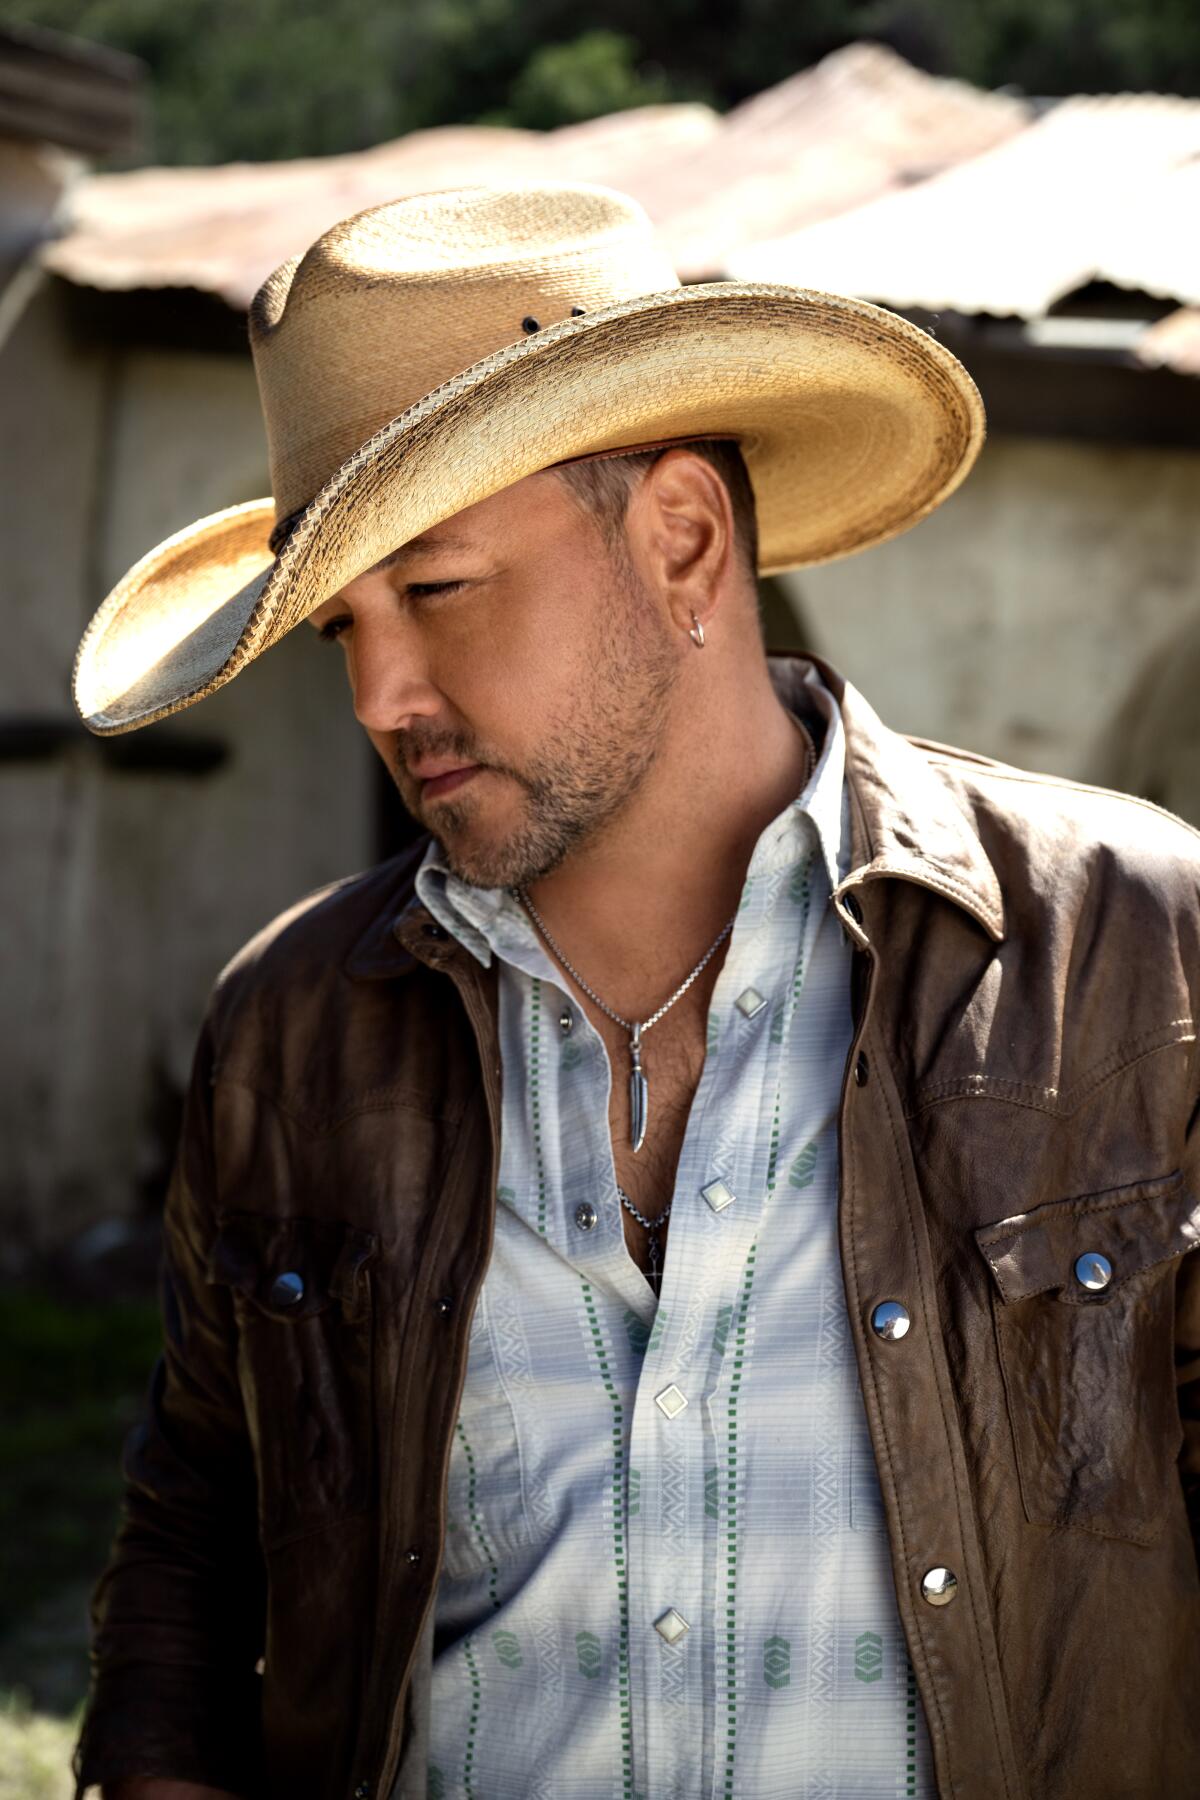 A country singer in a plaid shirt and cowboy hat